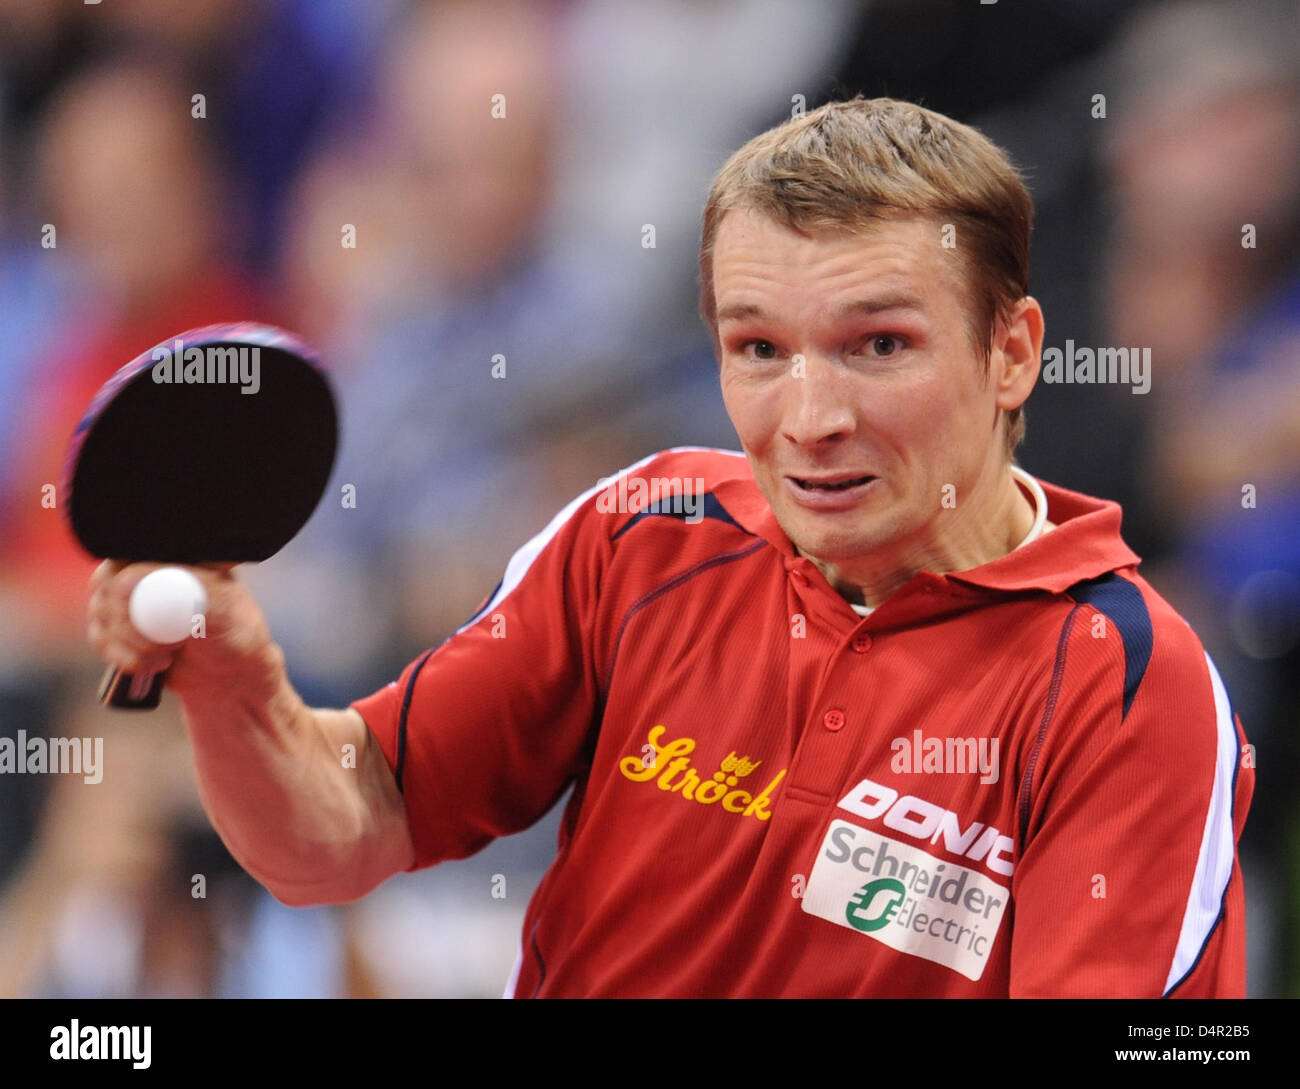 Werner Schlager from Austria plays against Fejer-Konnerth from Germany during the men?s singles competition of the European Table Tennis Championships at Porsche-Arena stadium in Stuttgart, Germany, 18 September 2009. Photo: Bernd Weissbrod Stock Photo